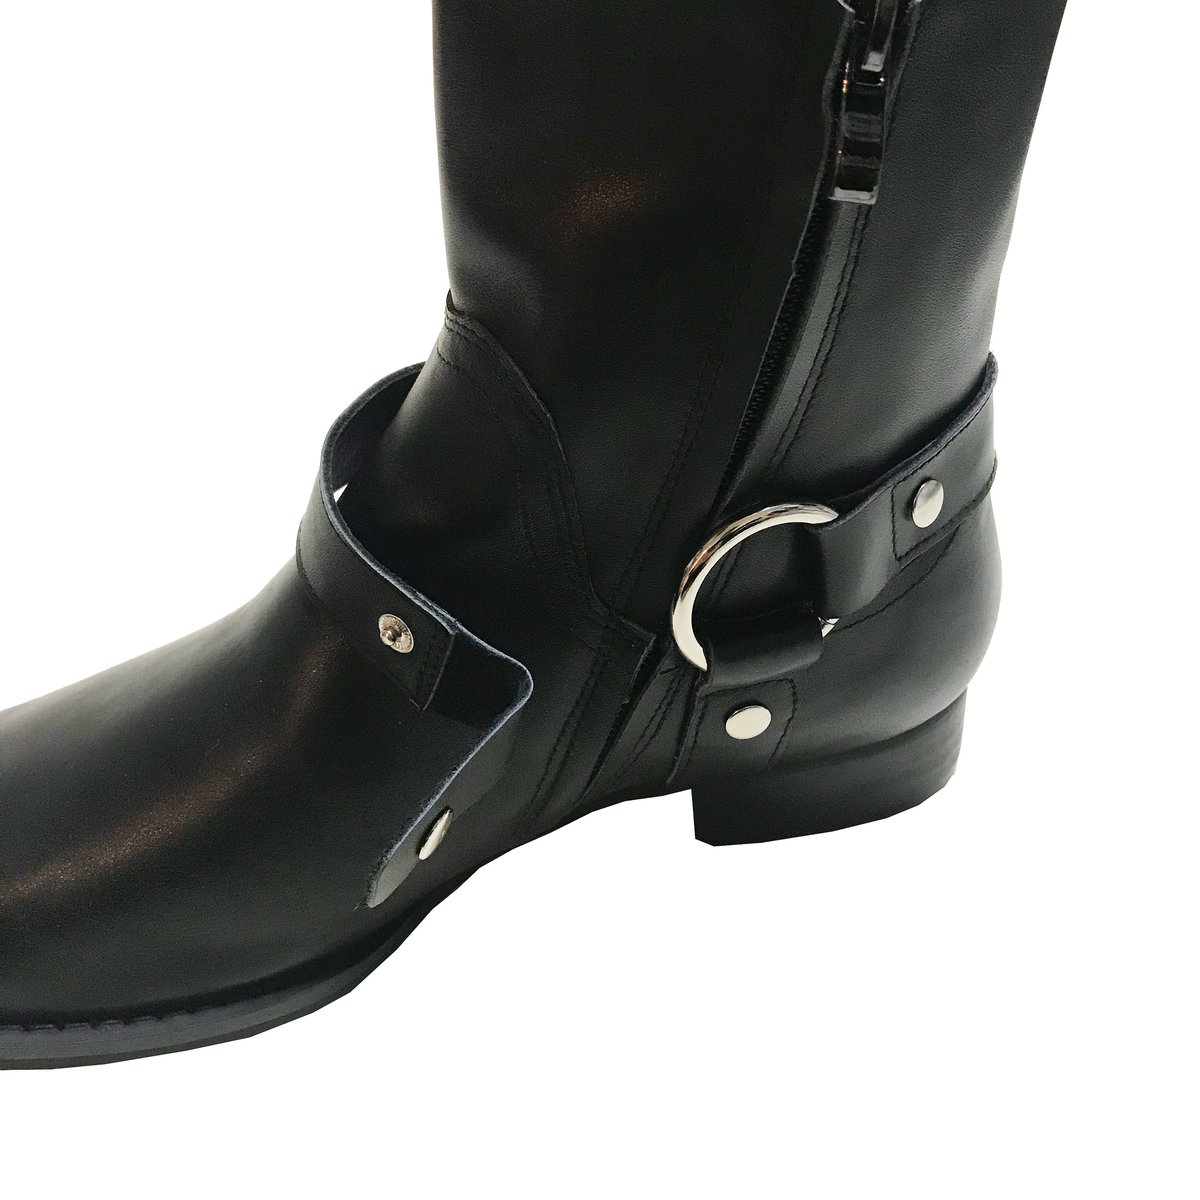 2way harness ring boots